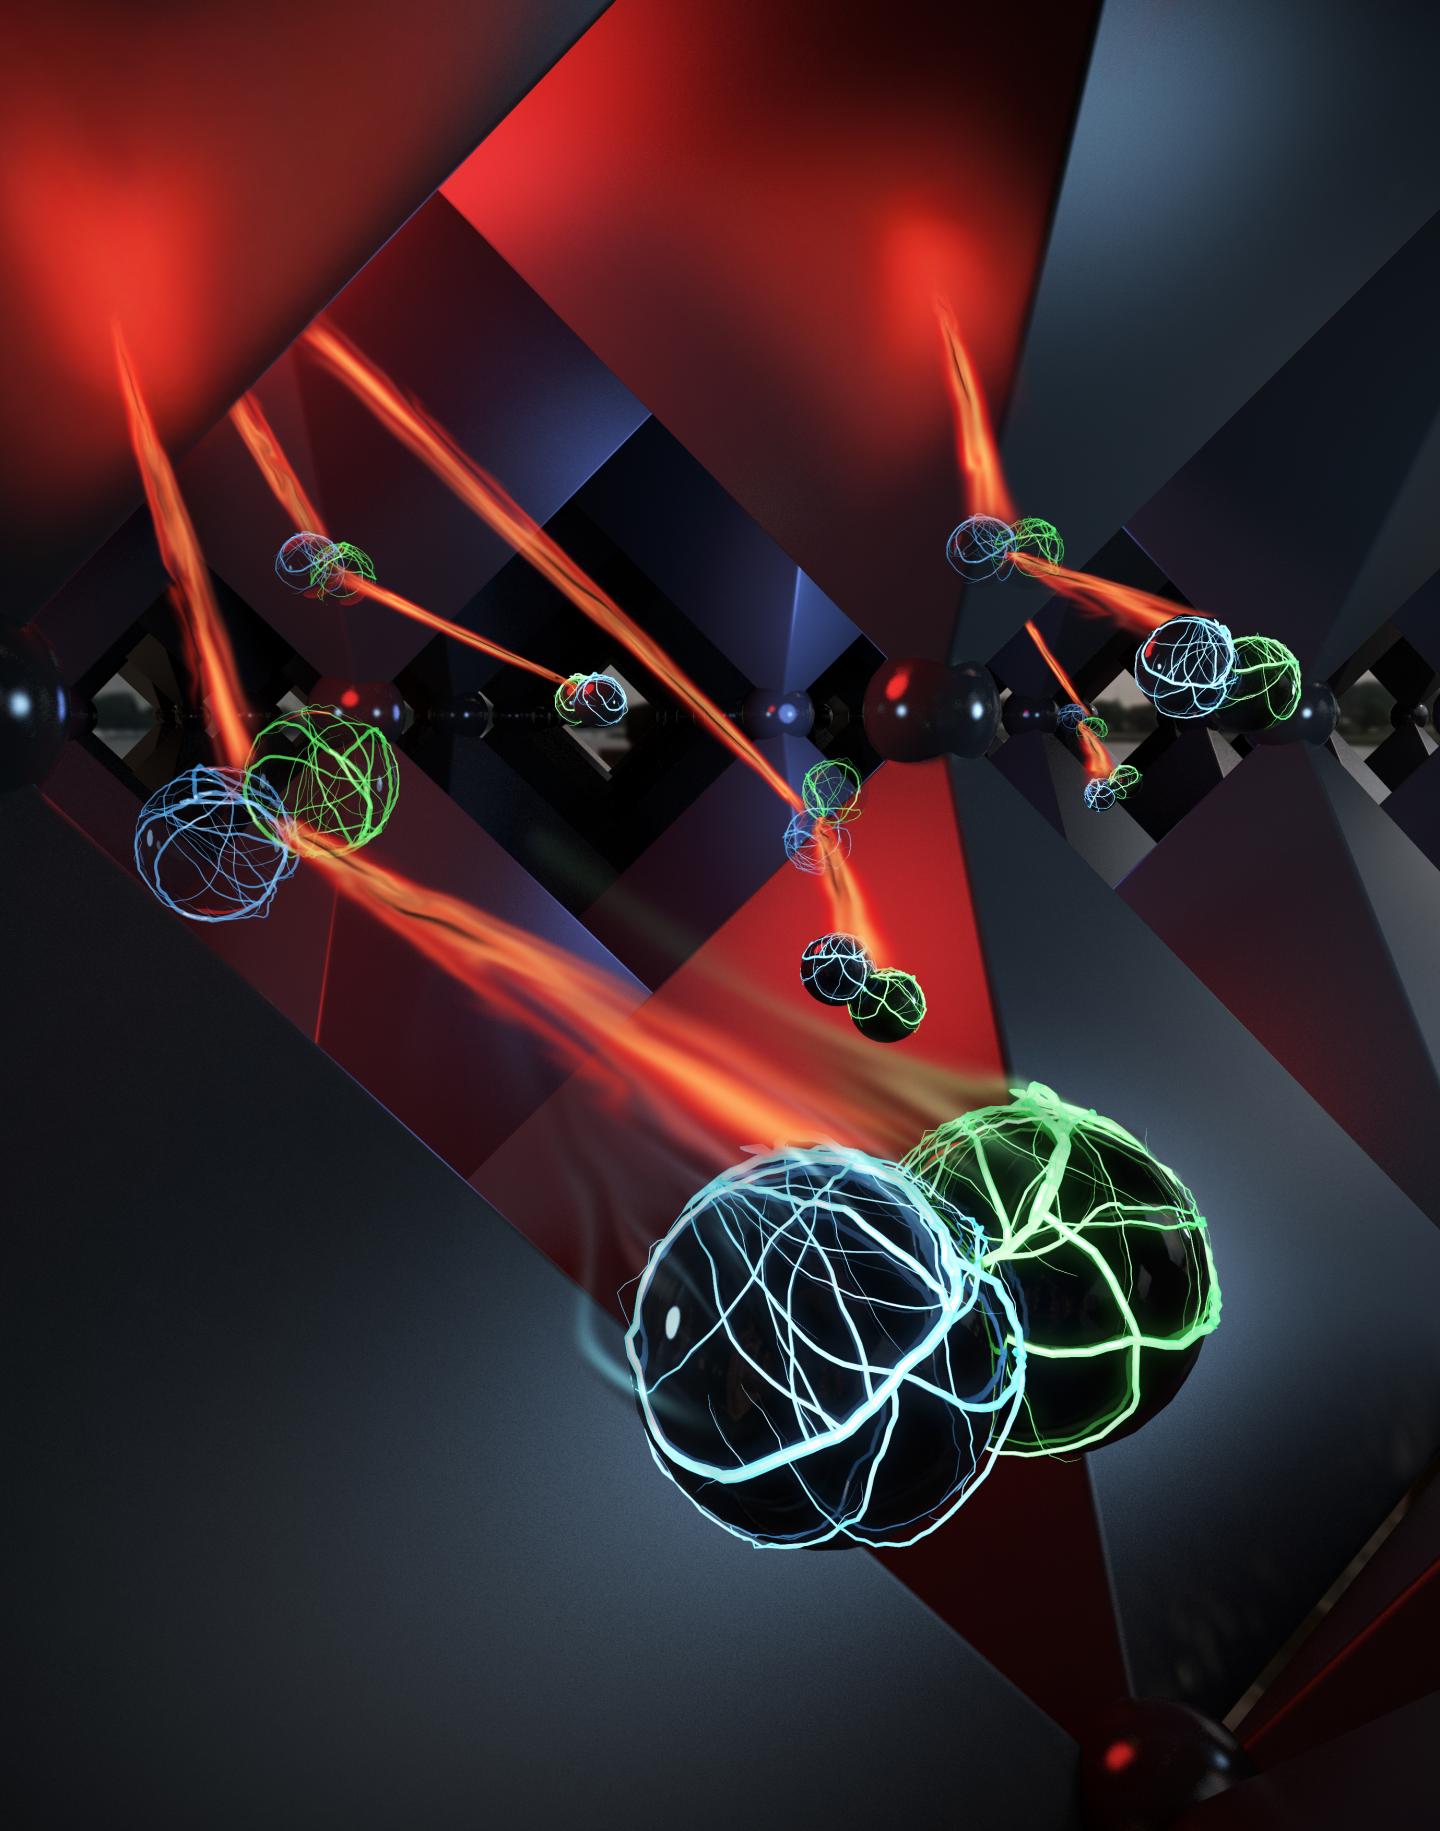 Depiction of Photon Recycling Inside the Crystalline Structure of Perovskite